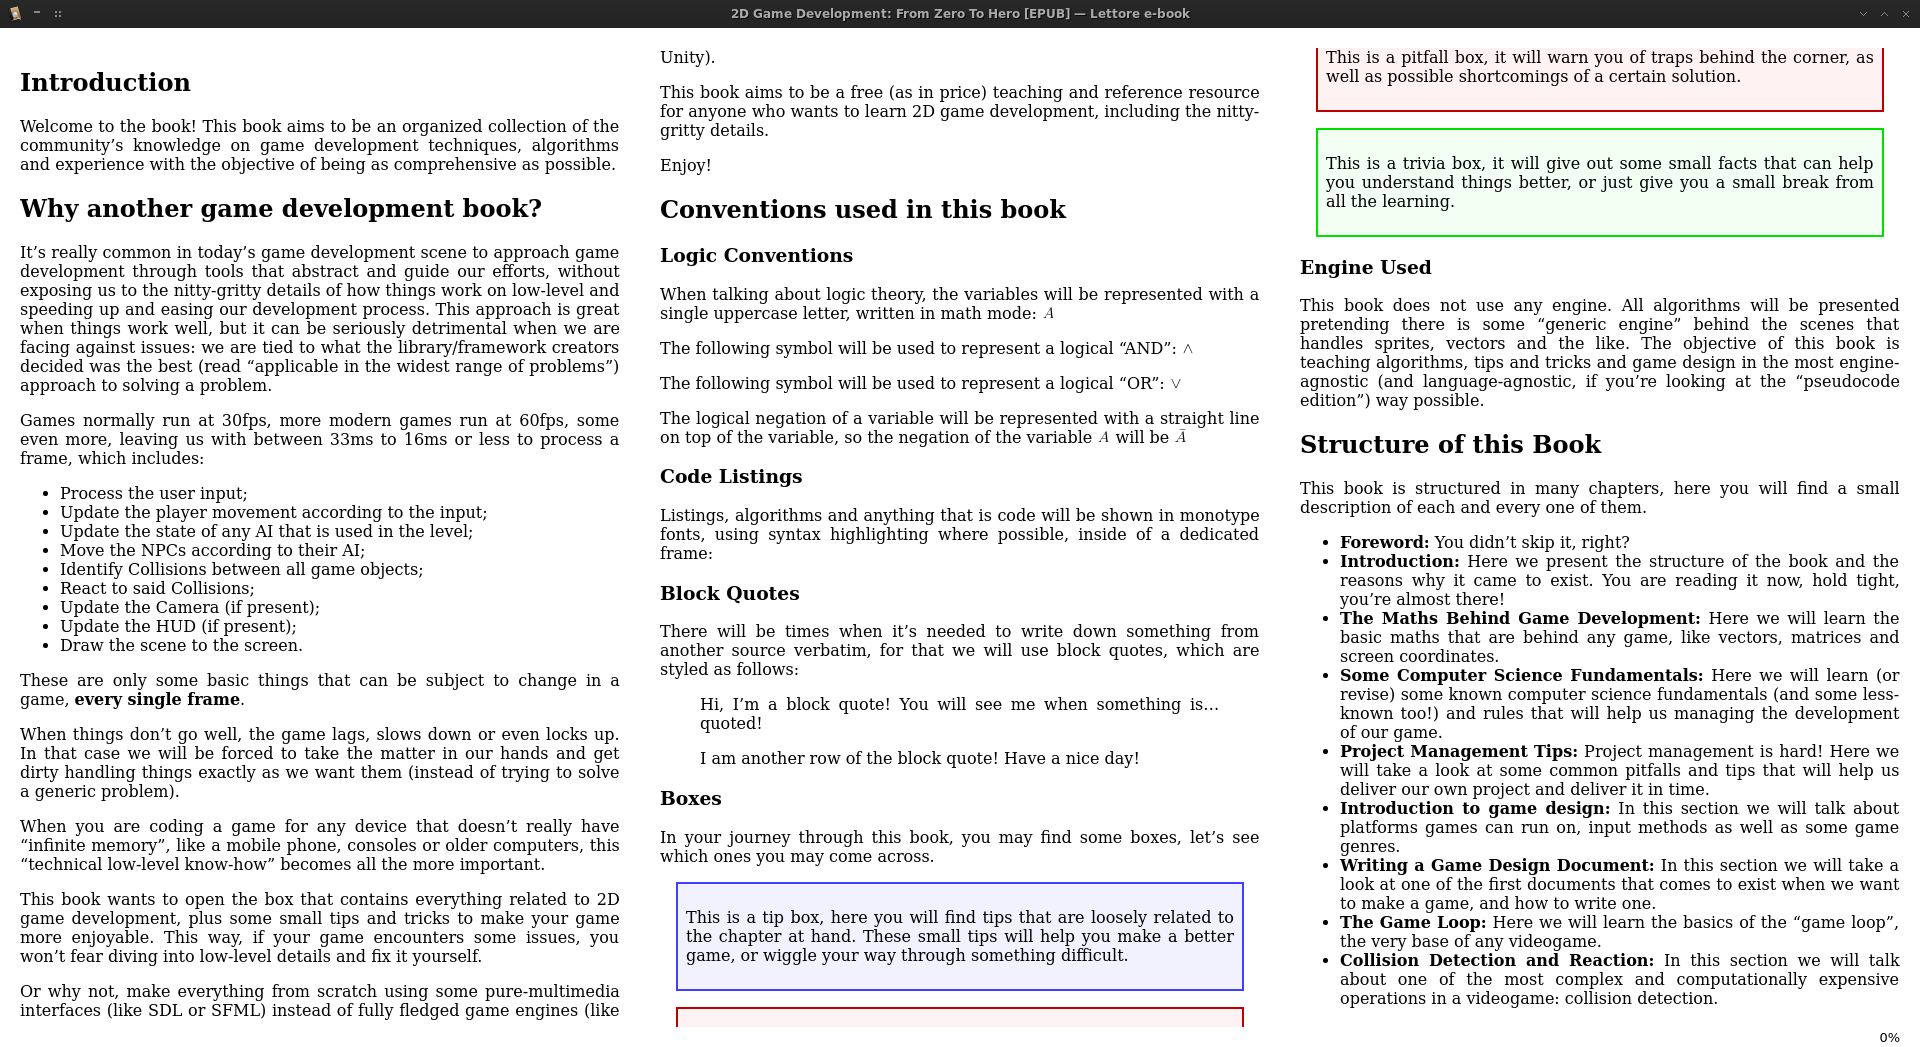 Screenshot of the WIP EPub Version of the book (2)